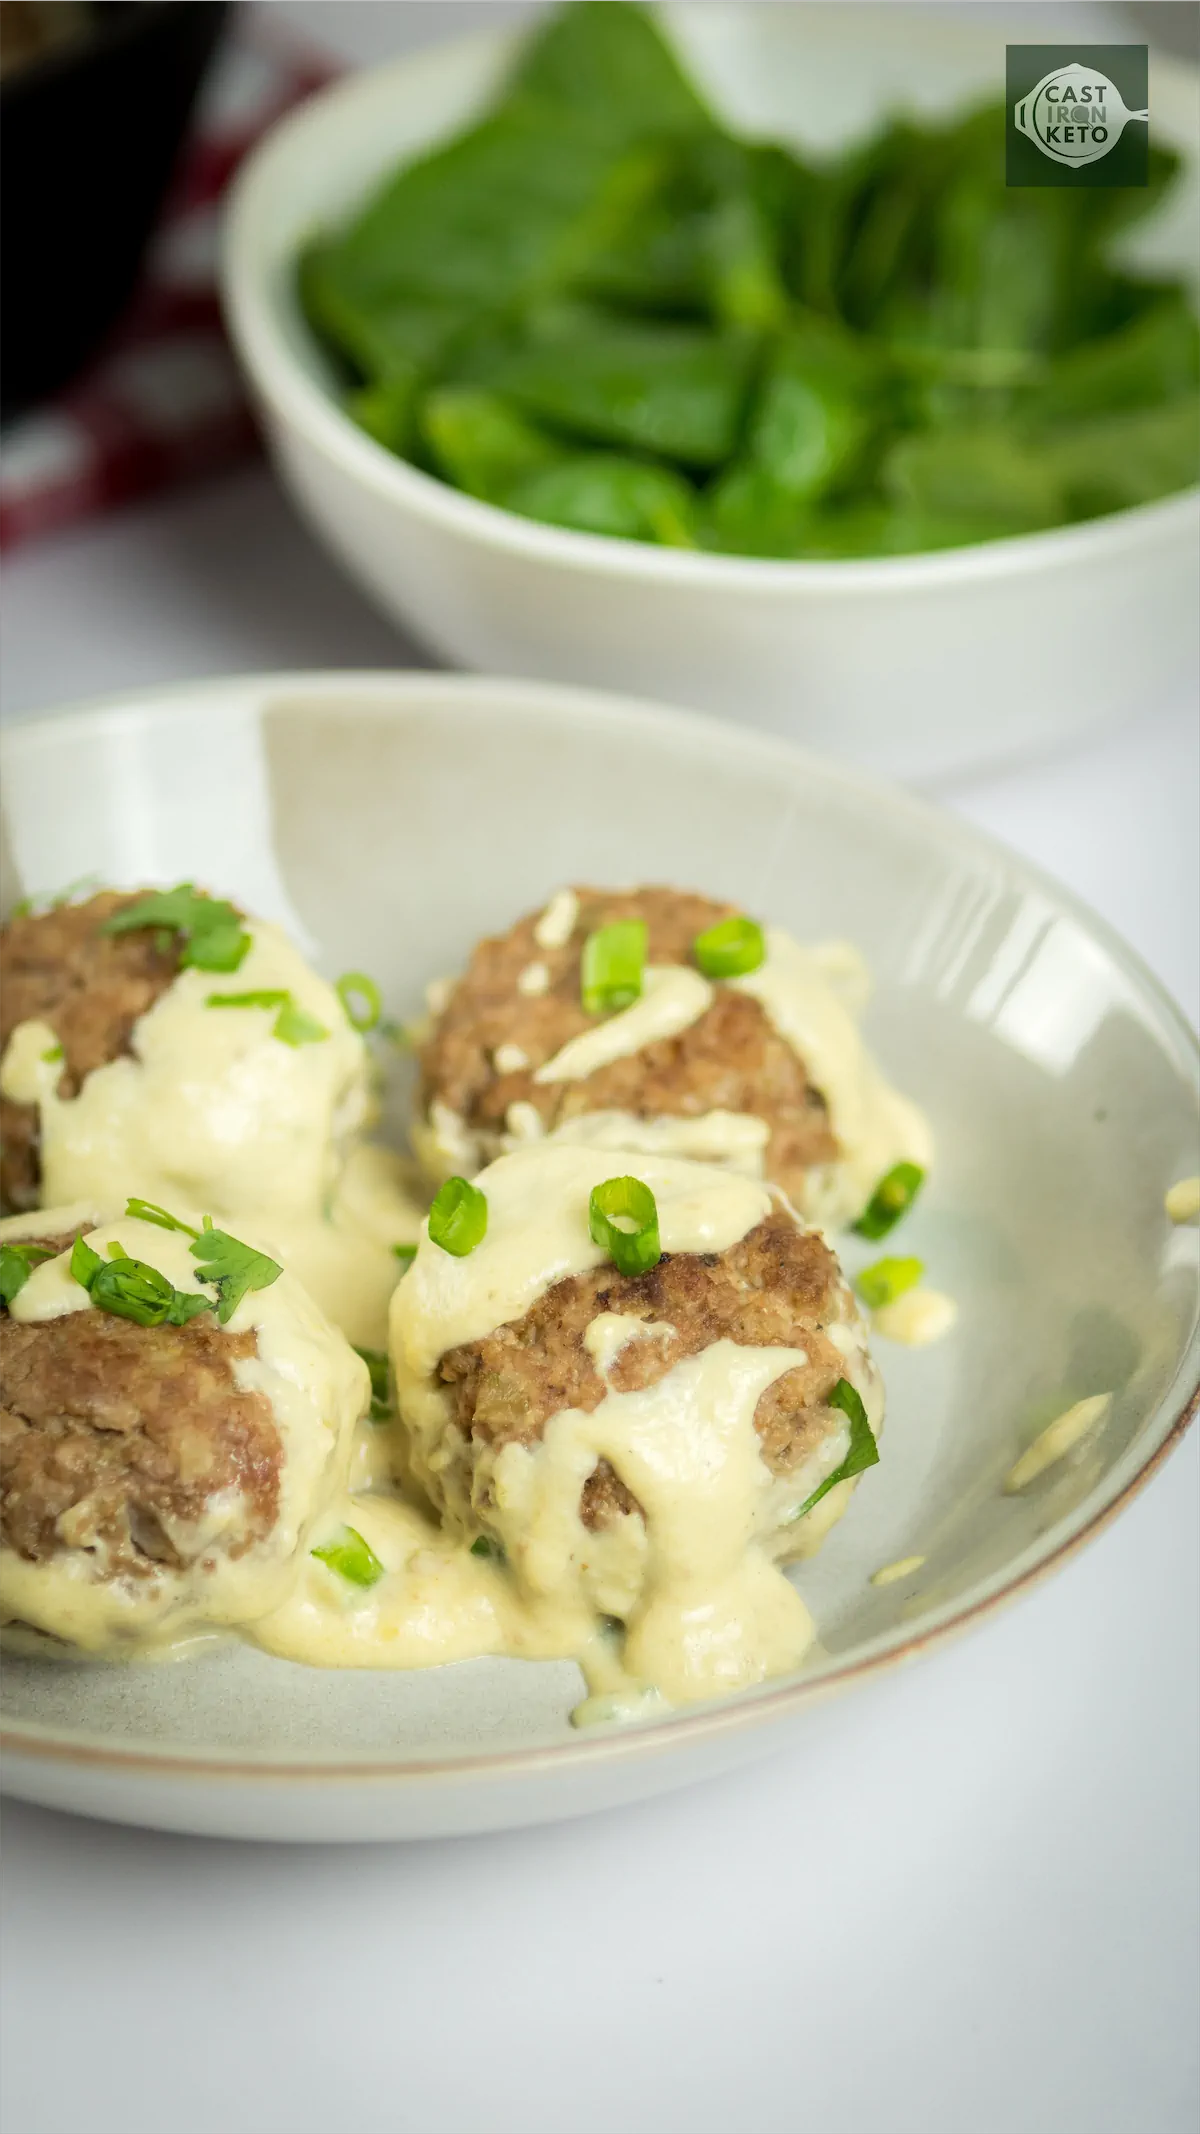 Swedish meatballs covered in creamy sauce on a plate.